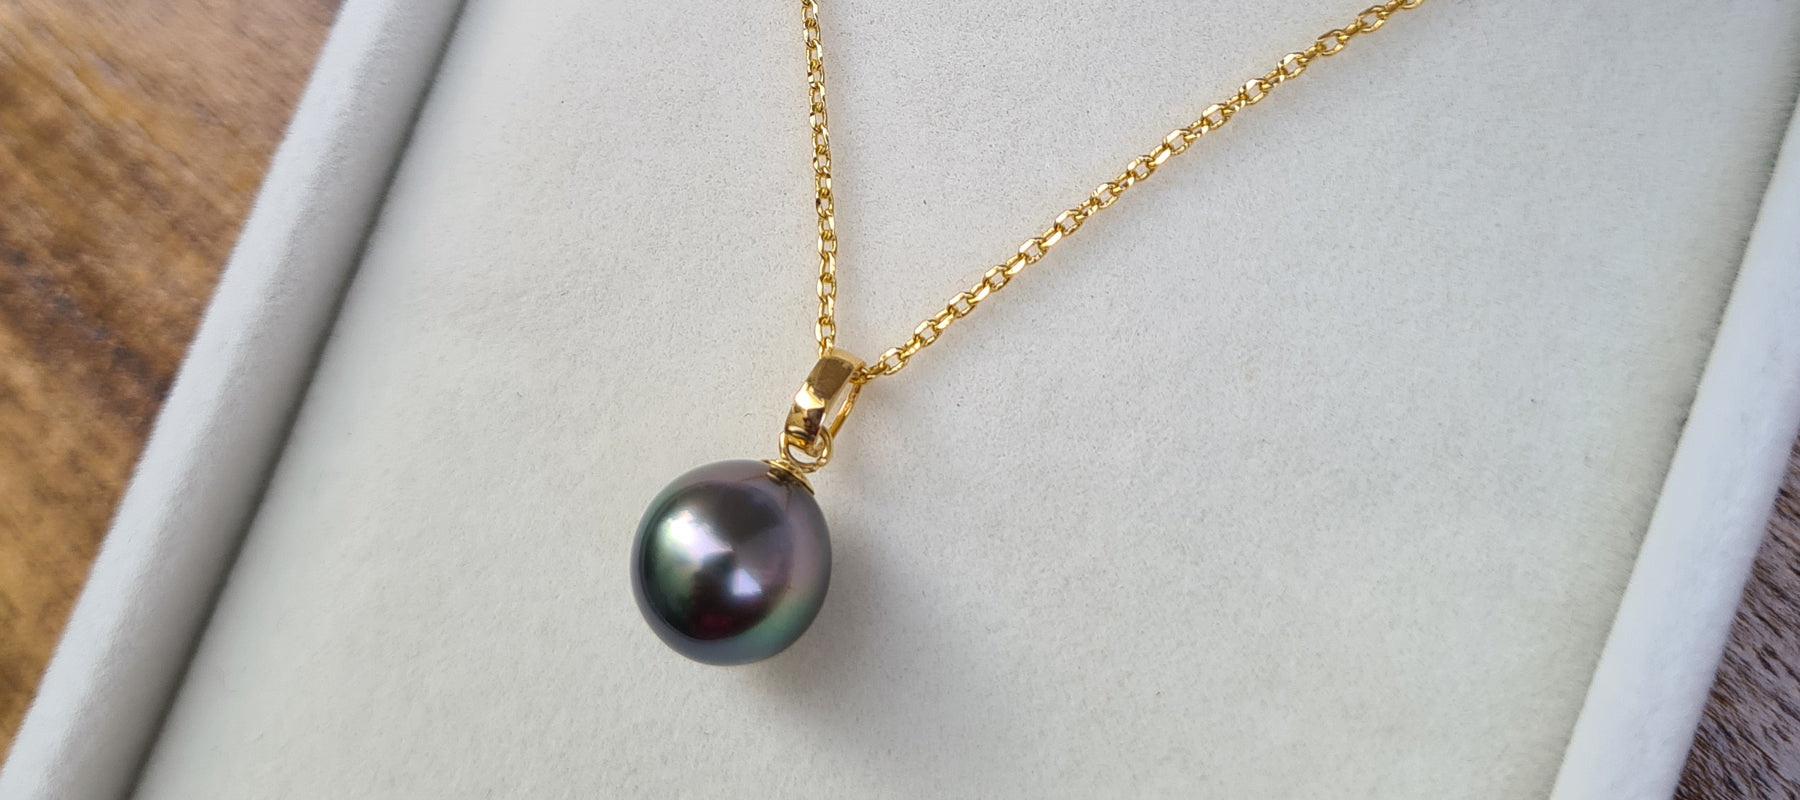 Unique Anniversary Gift Ideas: Pearls Beyond the Strand Necklace